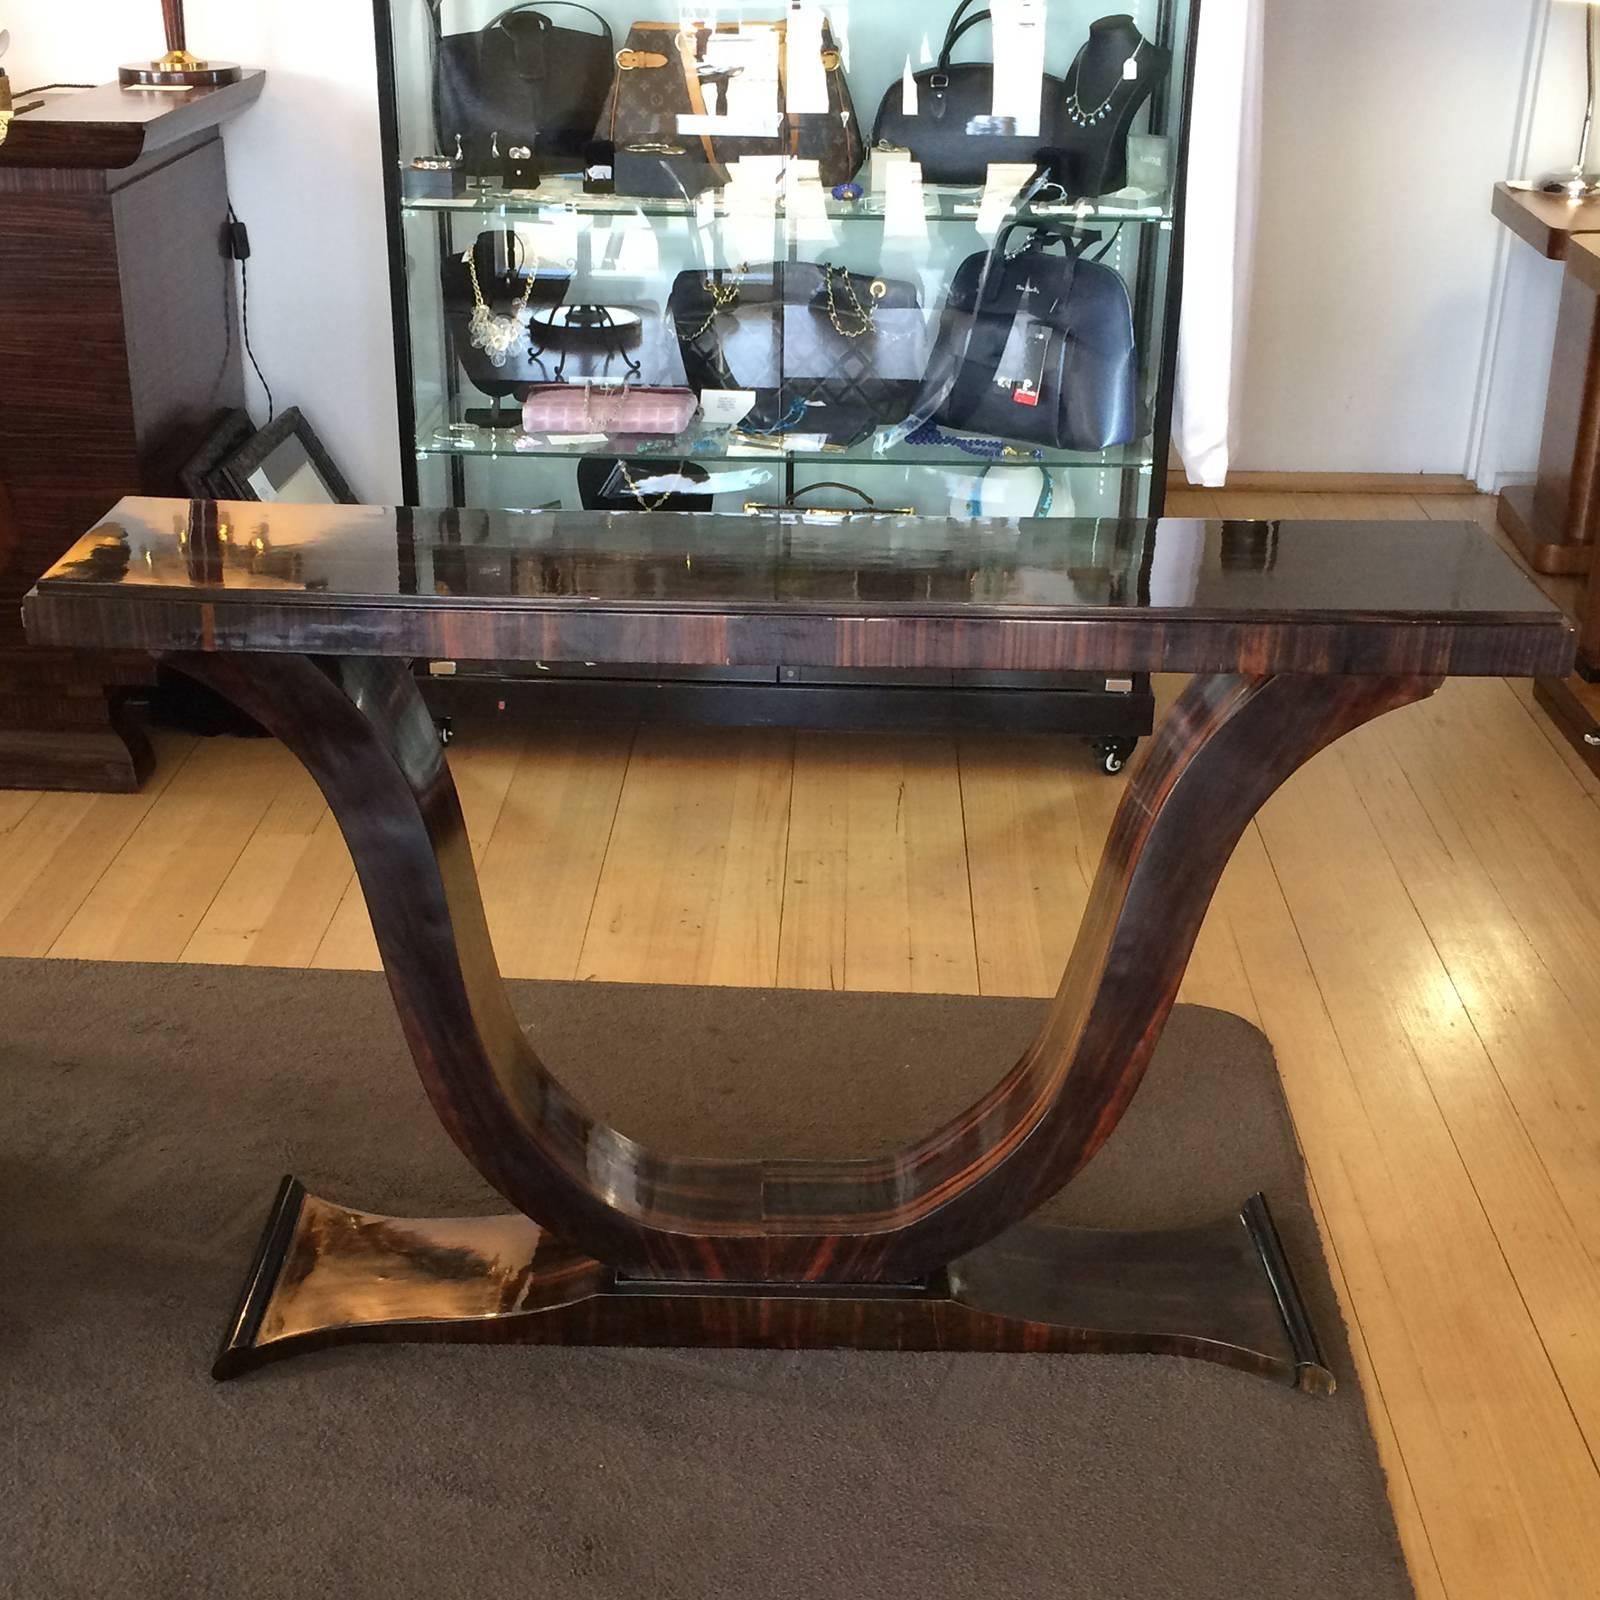 Art Deco style console table in lacquered Macassar wood. An amazing, iconic deco shape, with spectacular timber grain. All in a soft, aged patina. Dimensions are approximate: 131cm wide at top (34cm at bottom toes) x 30.5cm deep x 80cm high.